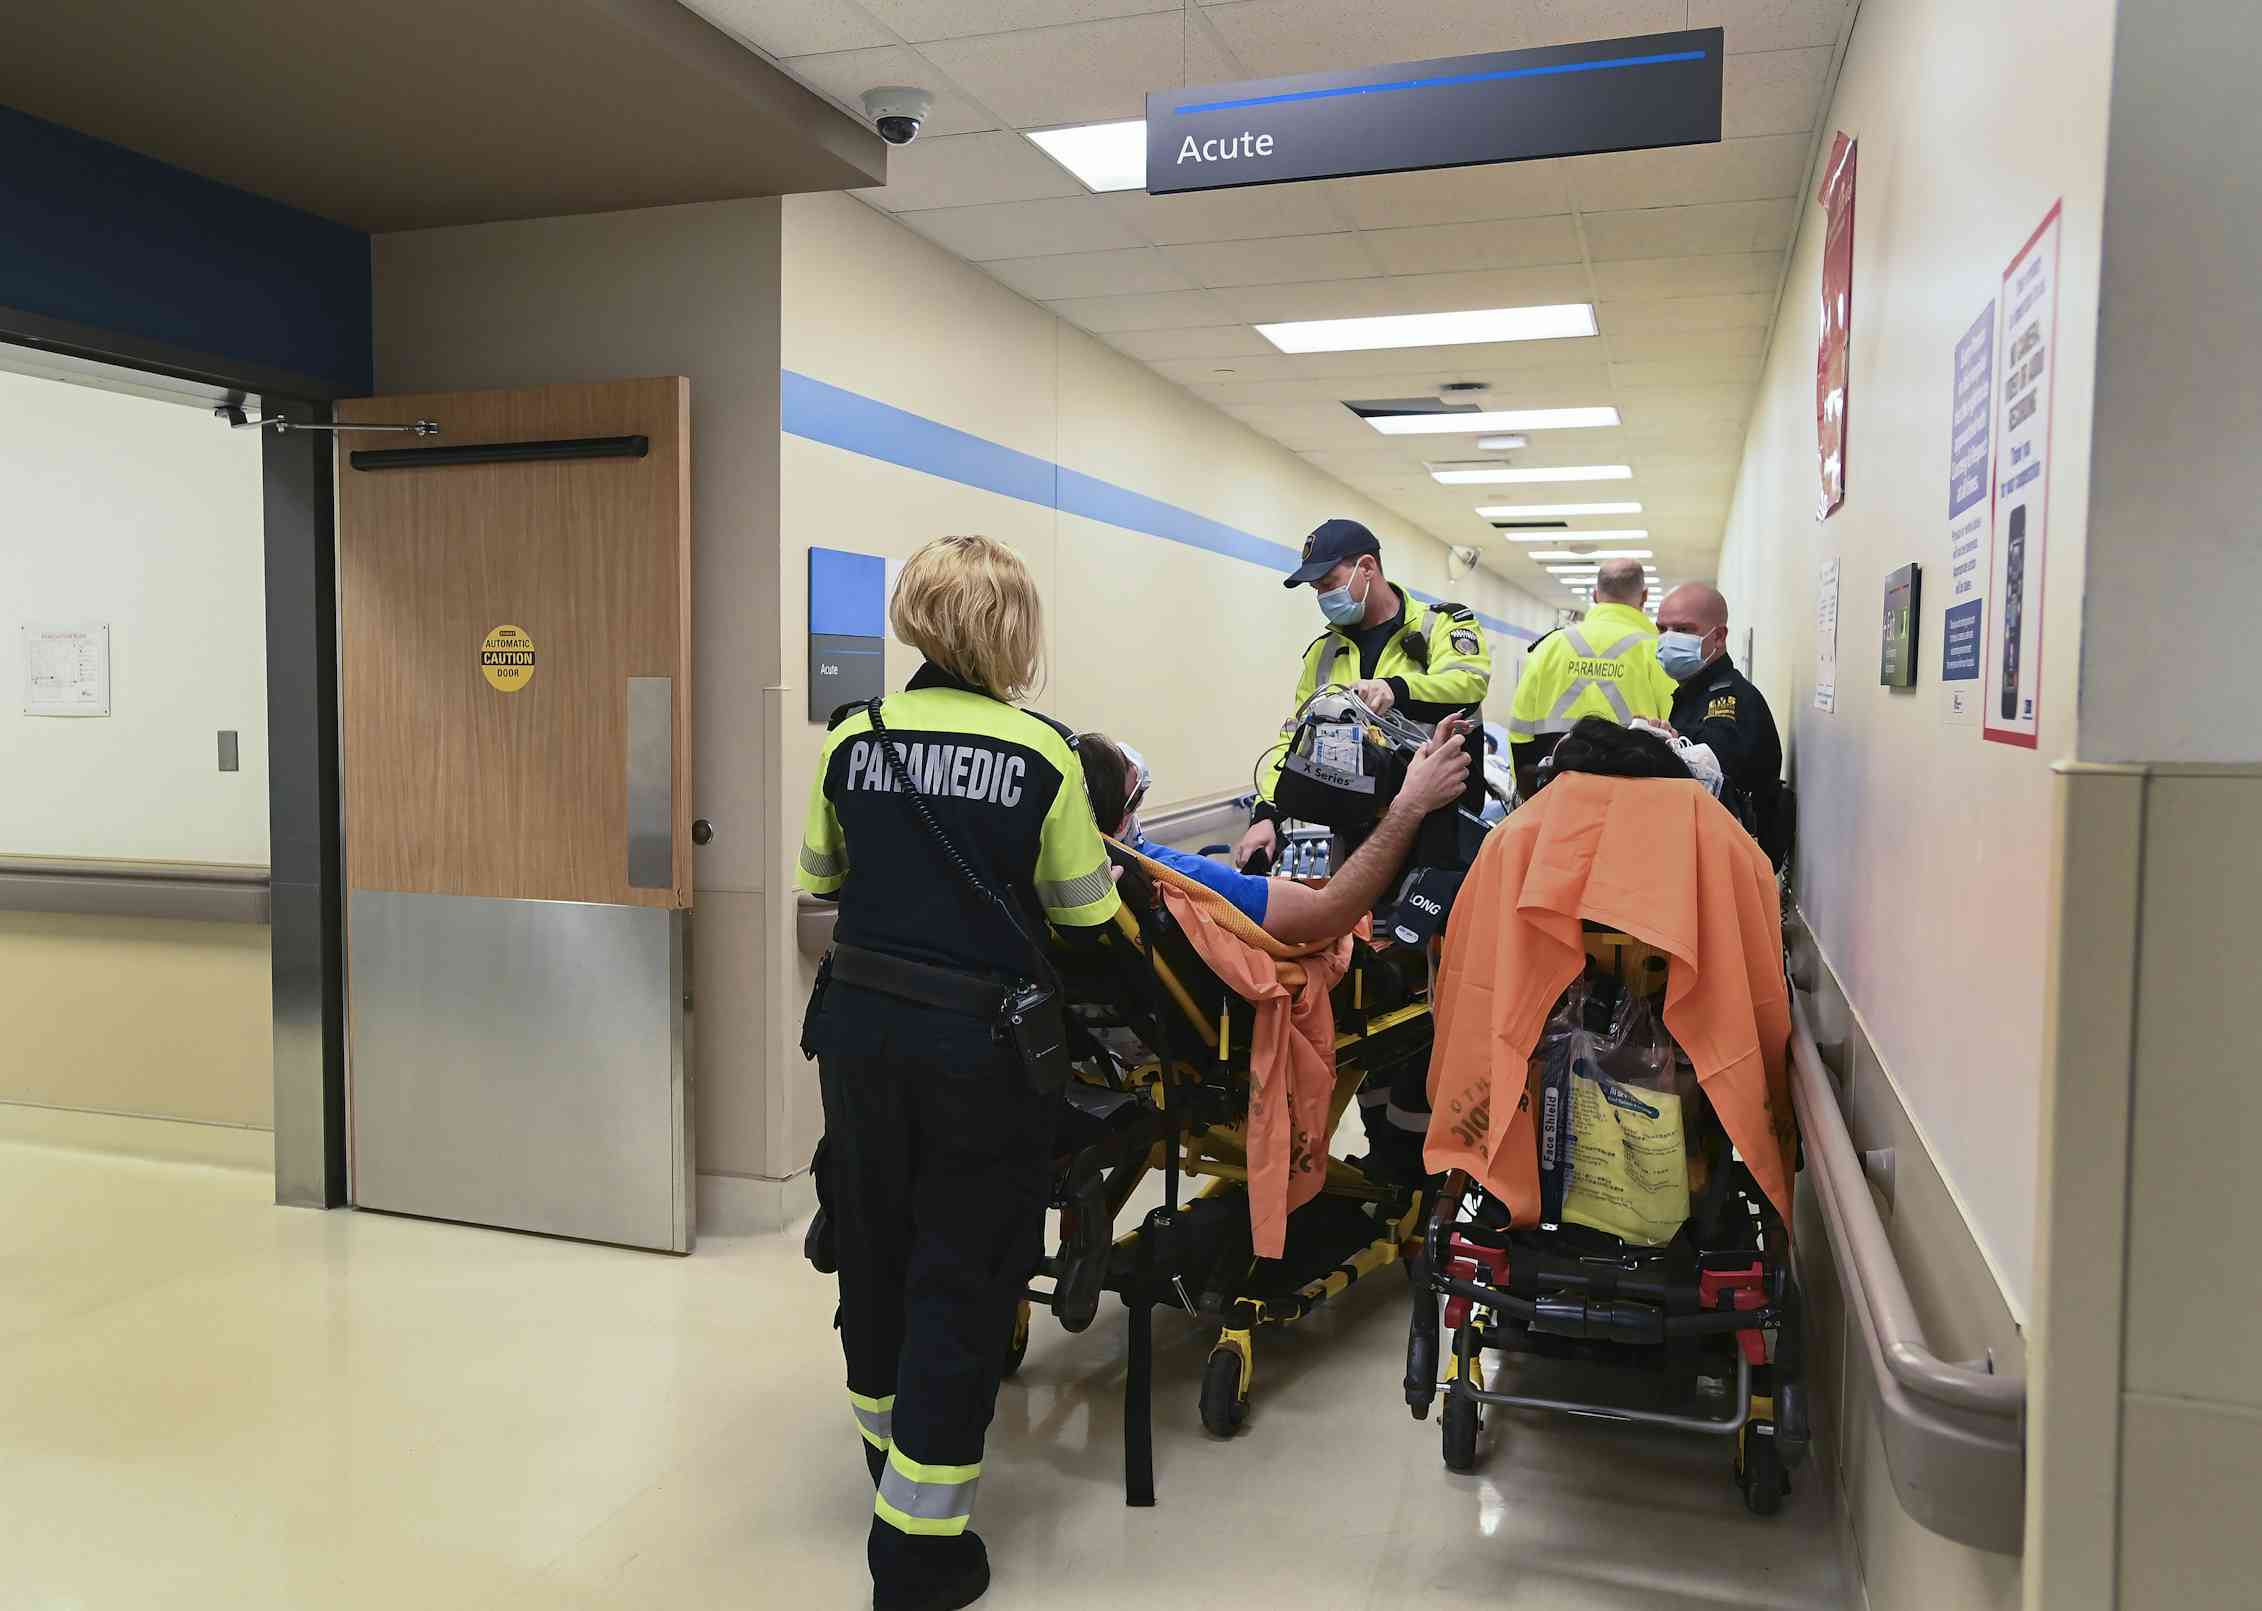 Paramedics wheeling a patient on a gurney draped in orange in a crowded hospital corridor